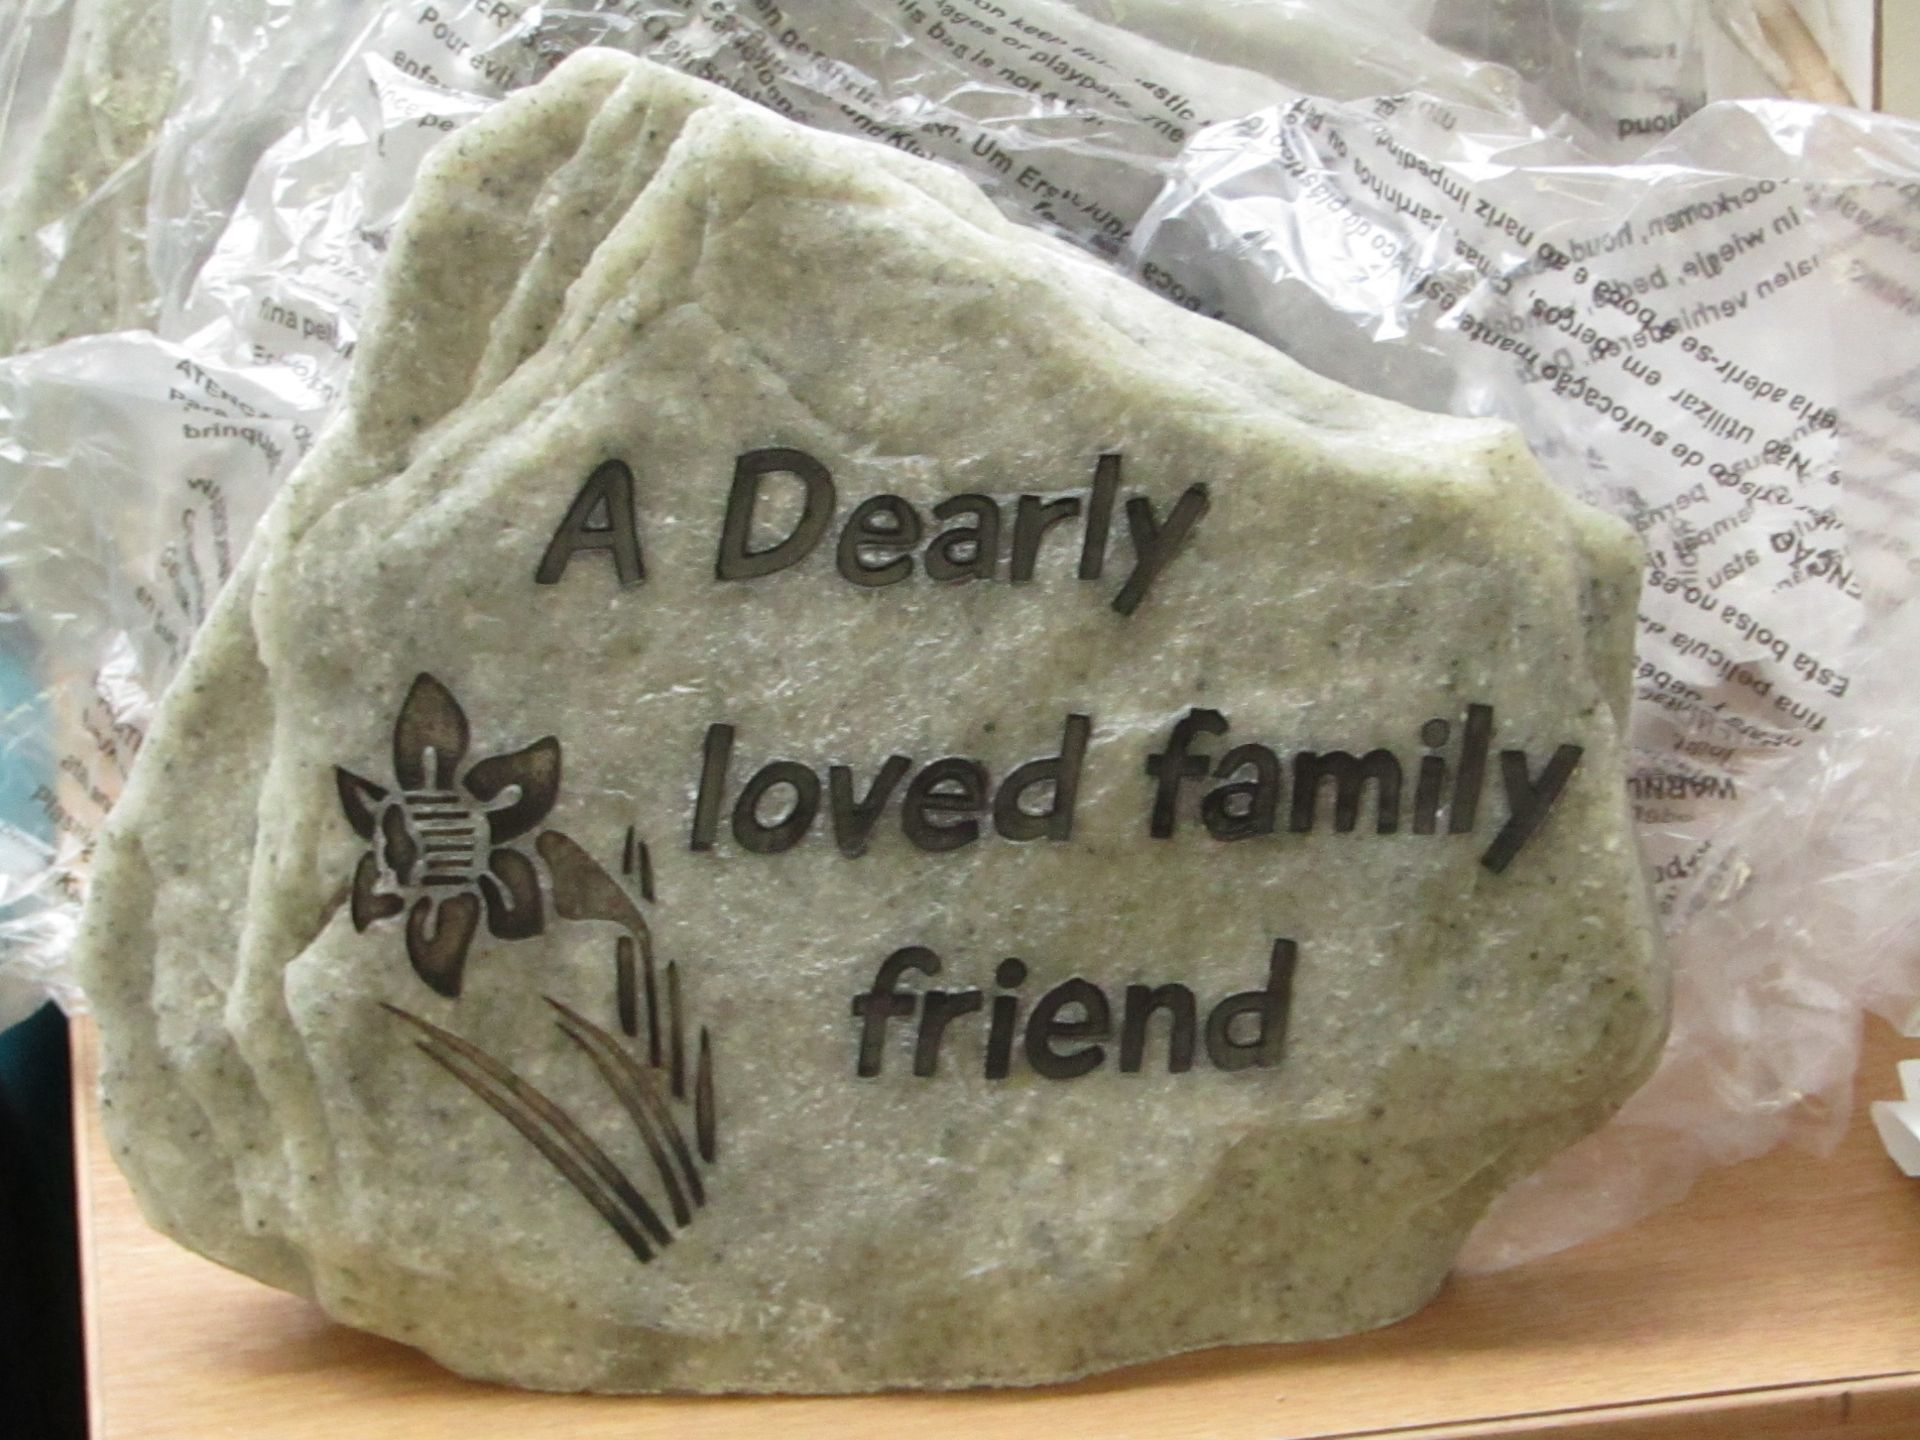 A dearly loved family friend memorial, unchecked and boxed.